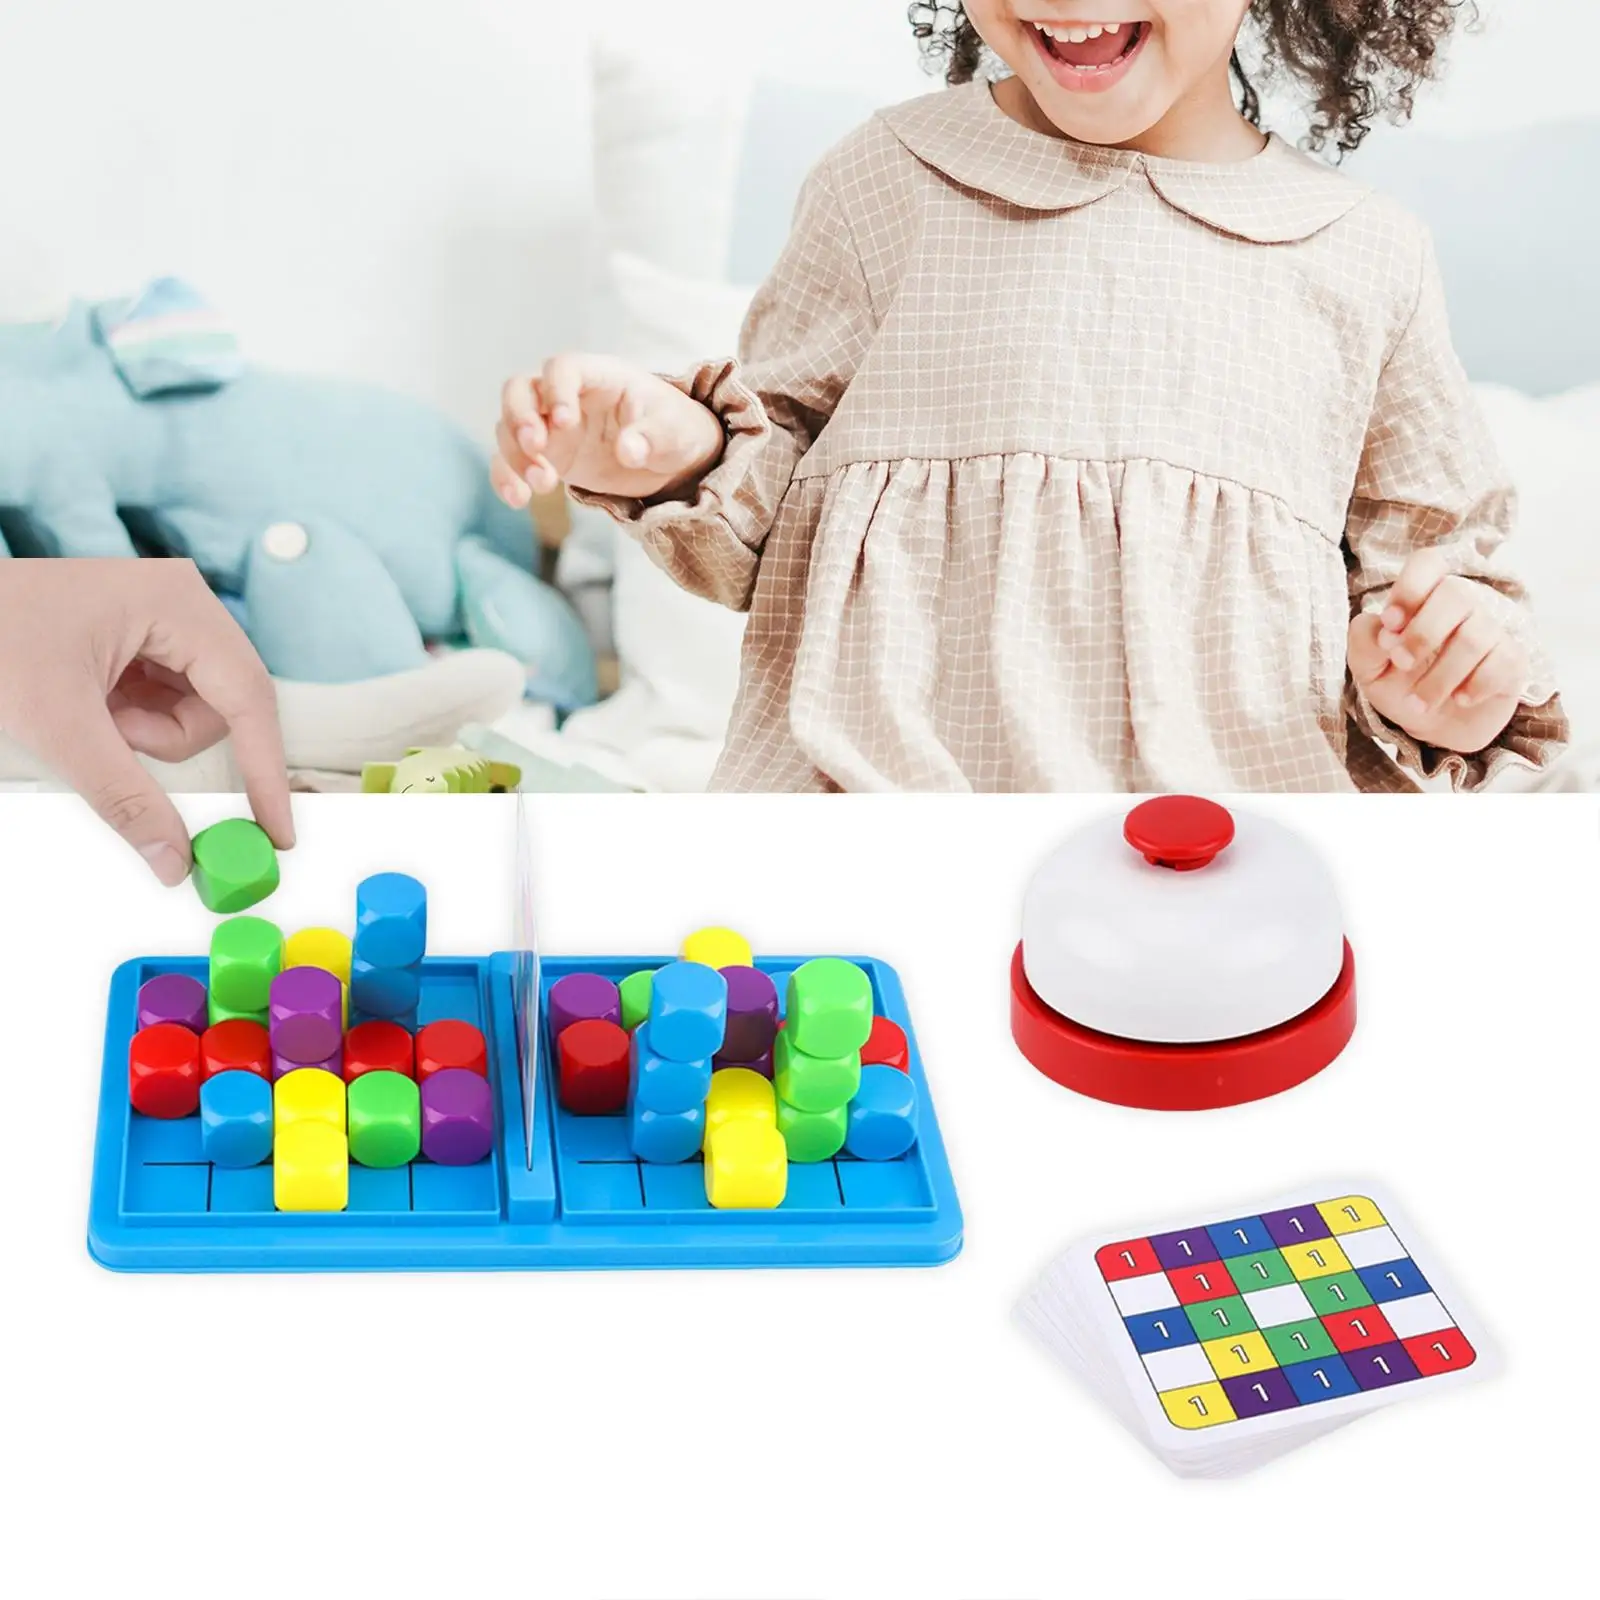 Colorful Matching Race Board Games Educational with BLOCKERS Fast Raced game for Travel Home Outdoors Activity